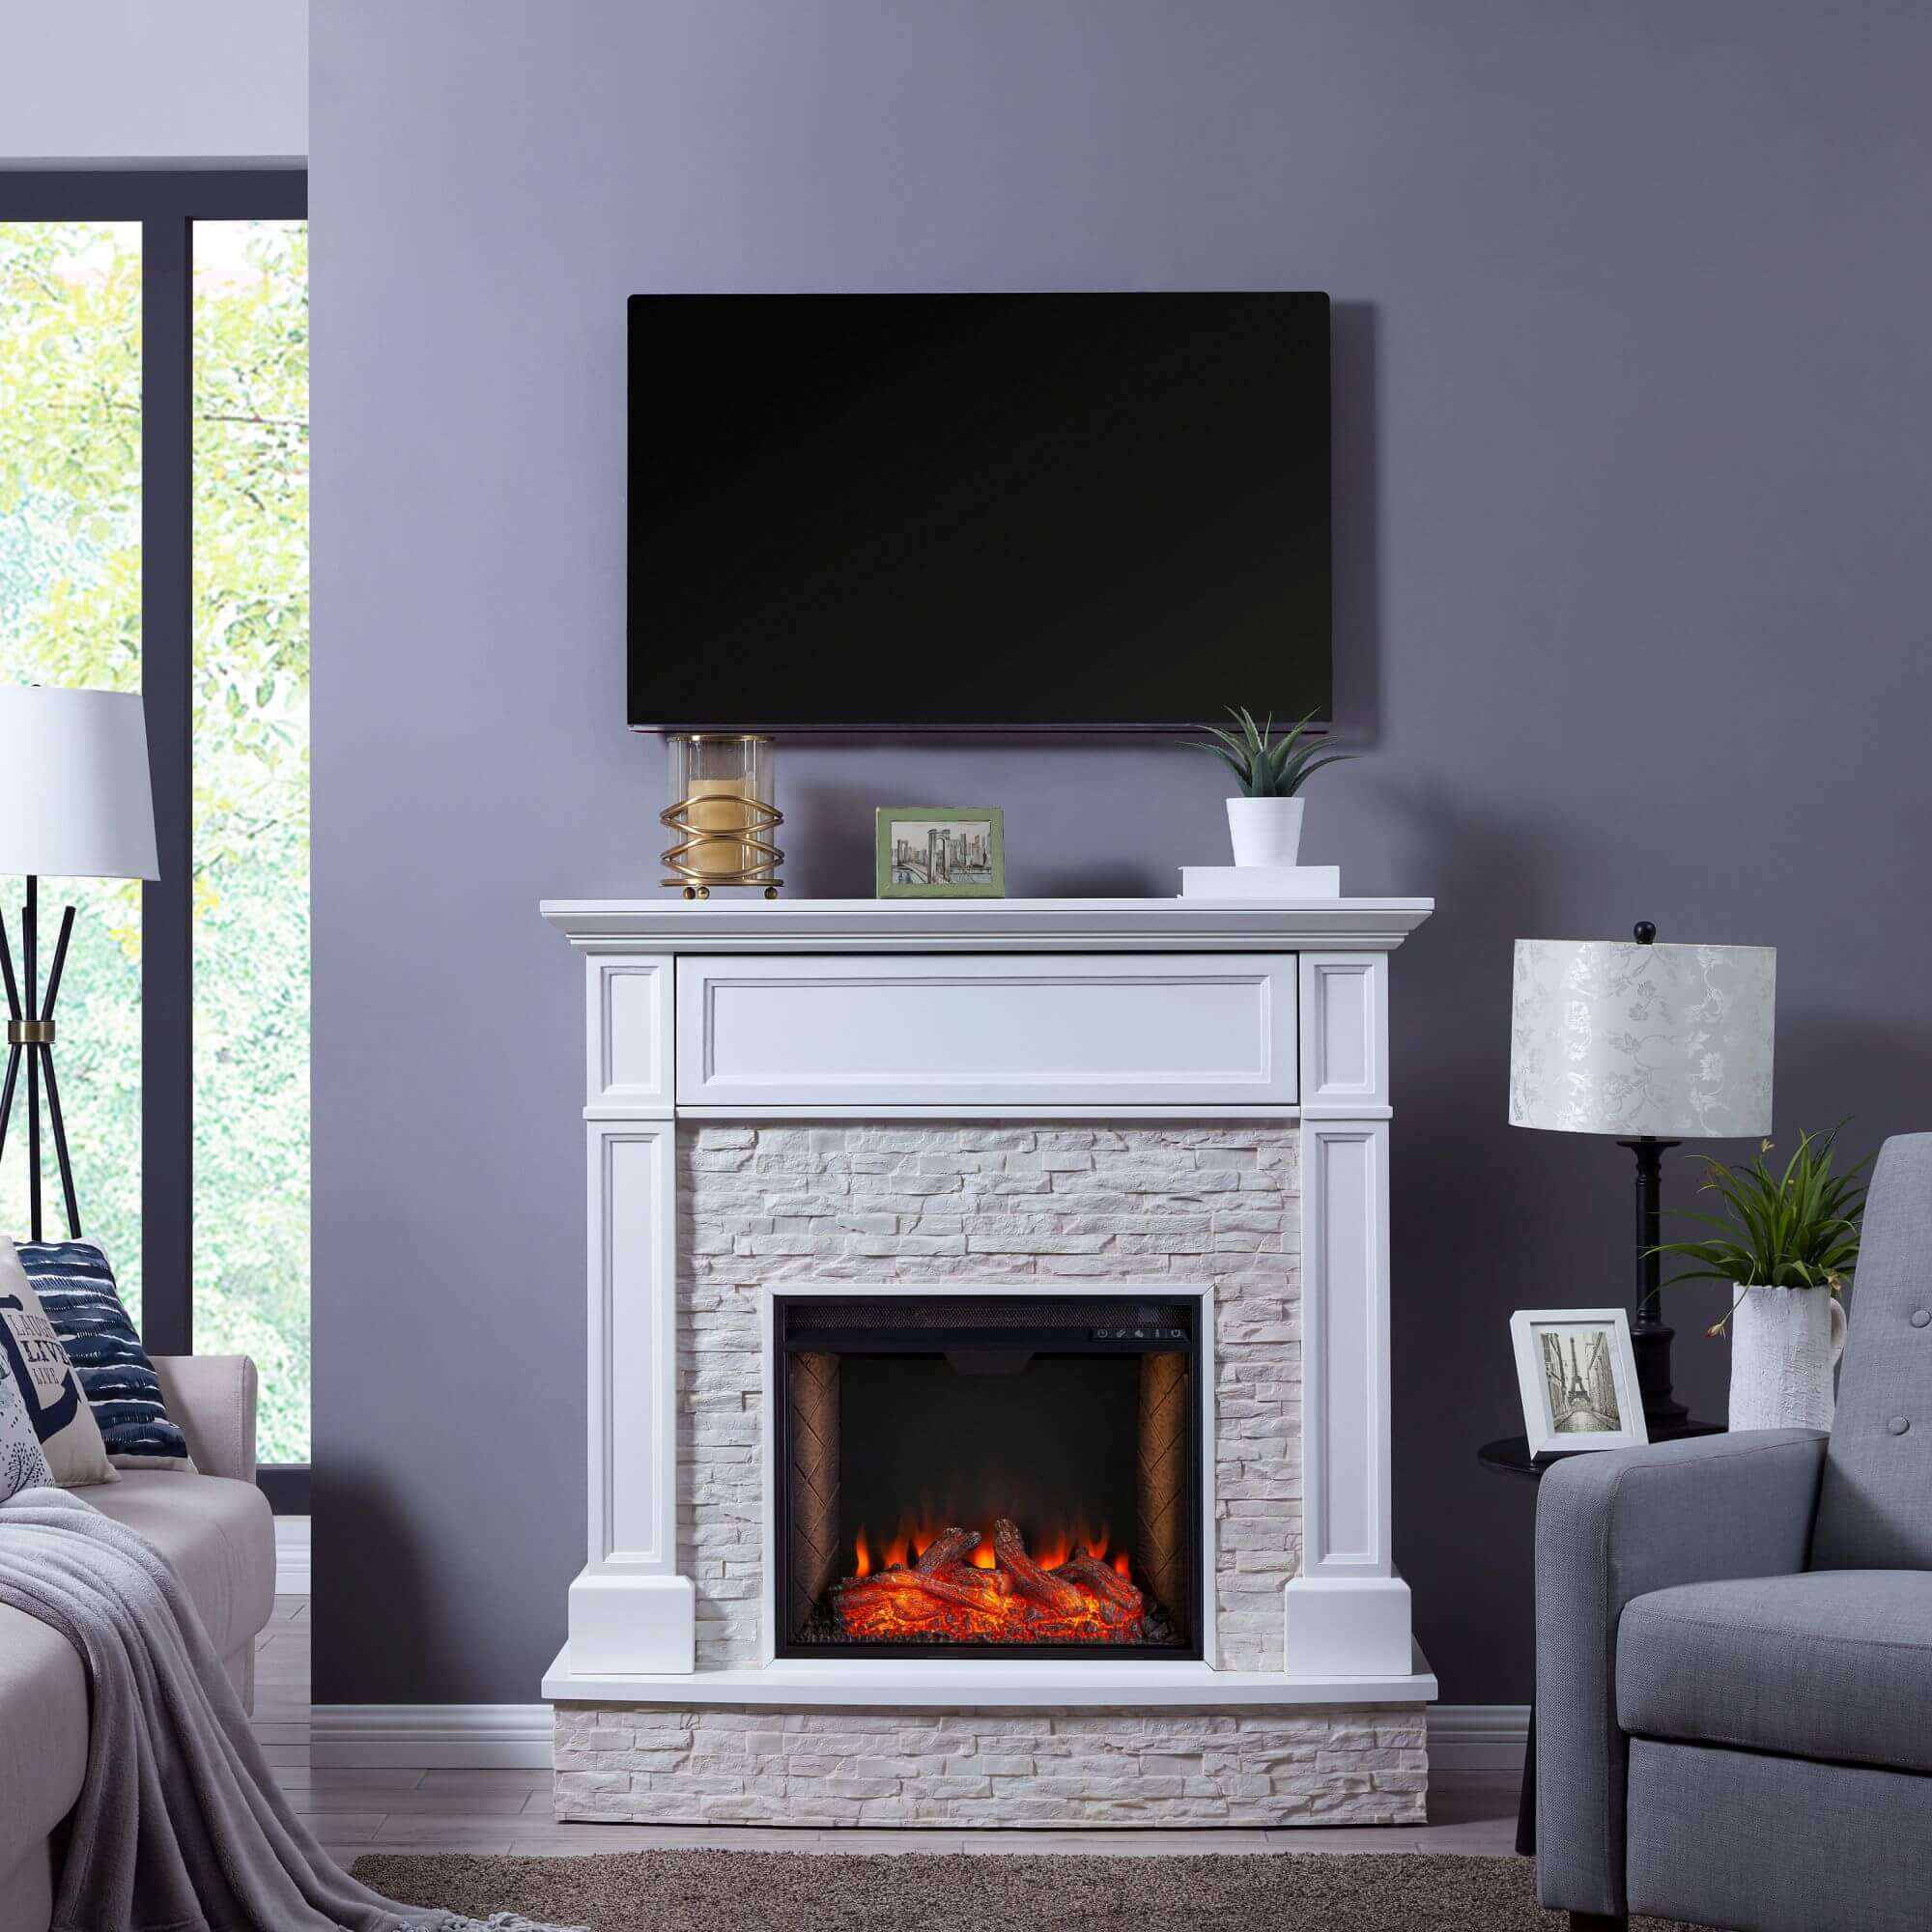 Jacksdale Smart Media Fireplace with Faux Stone